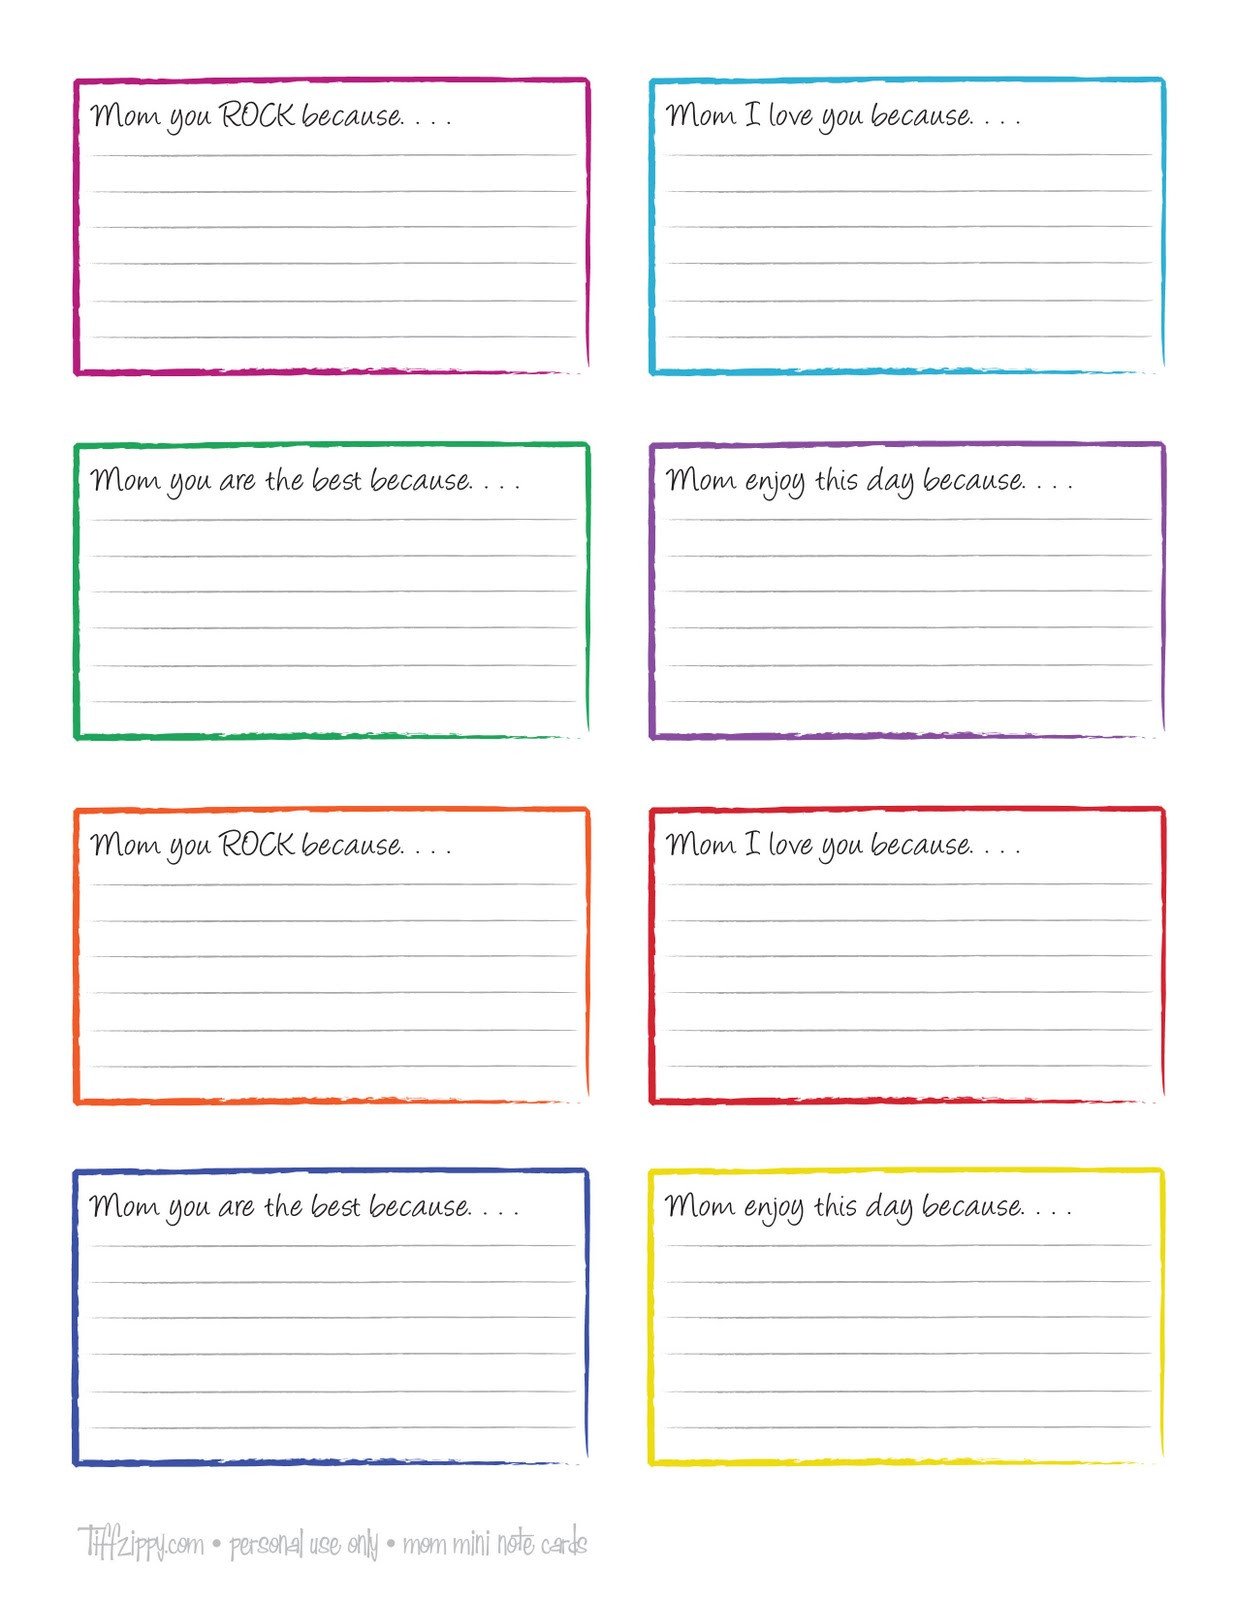 Note Card Template Free Tiffzippy Just Zipping Through Free Printable Mom